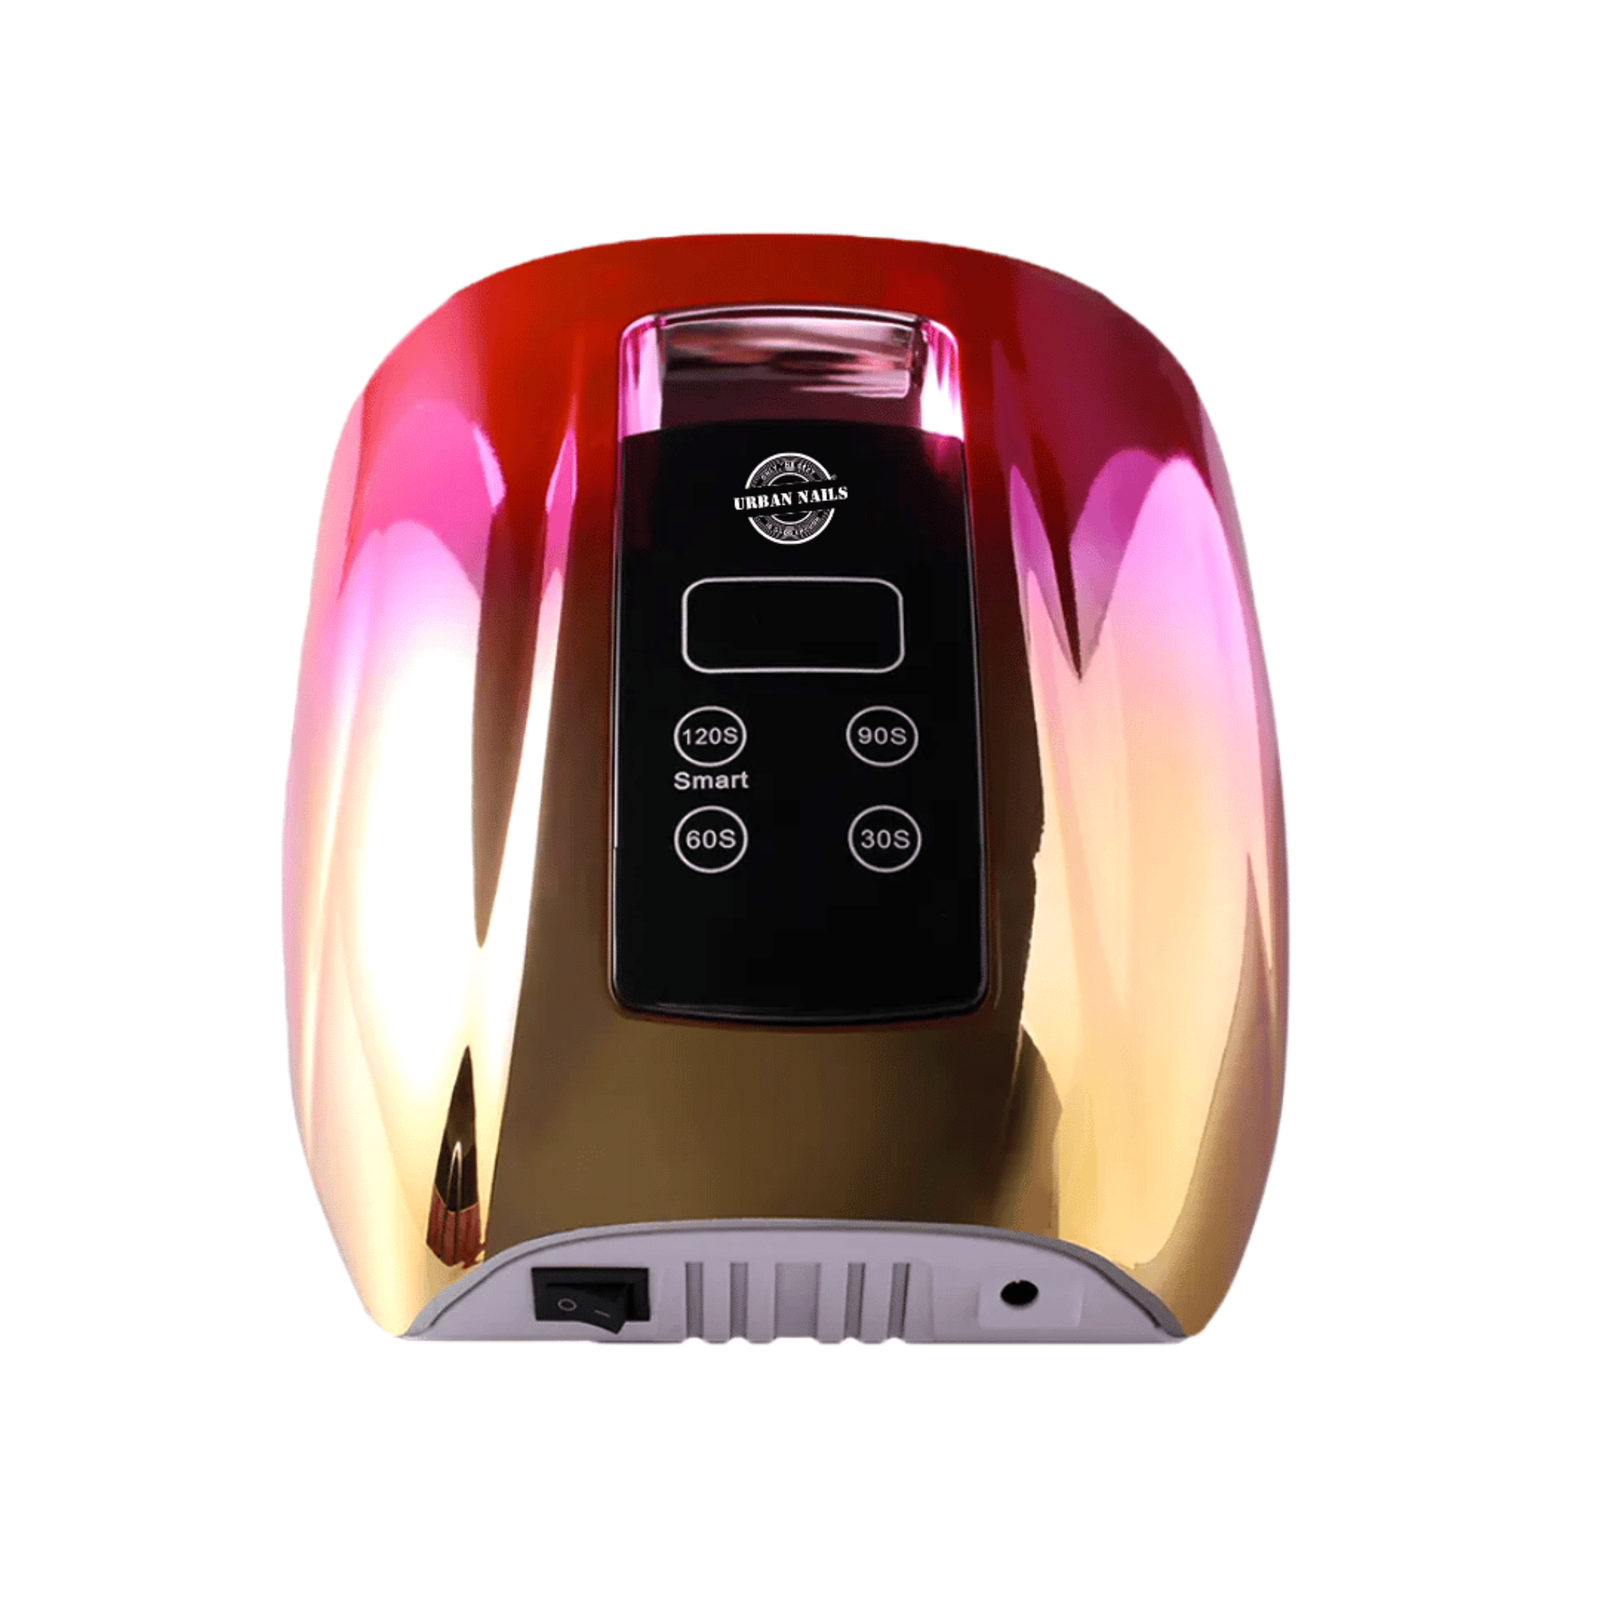 Urban nails Cordless rechargeable uv/led lamp